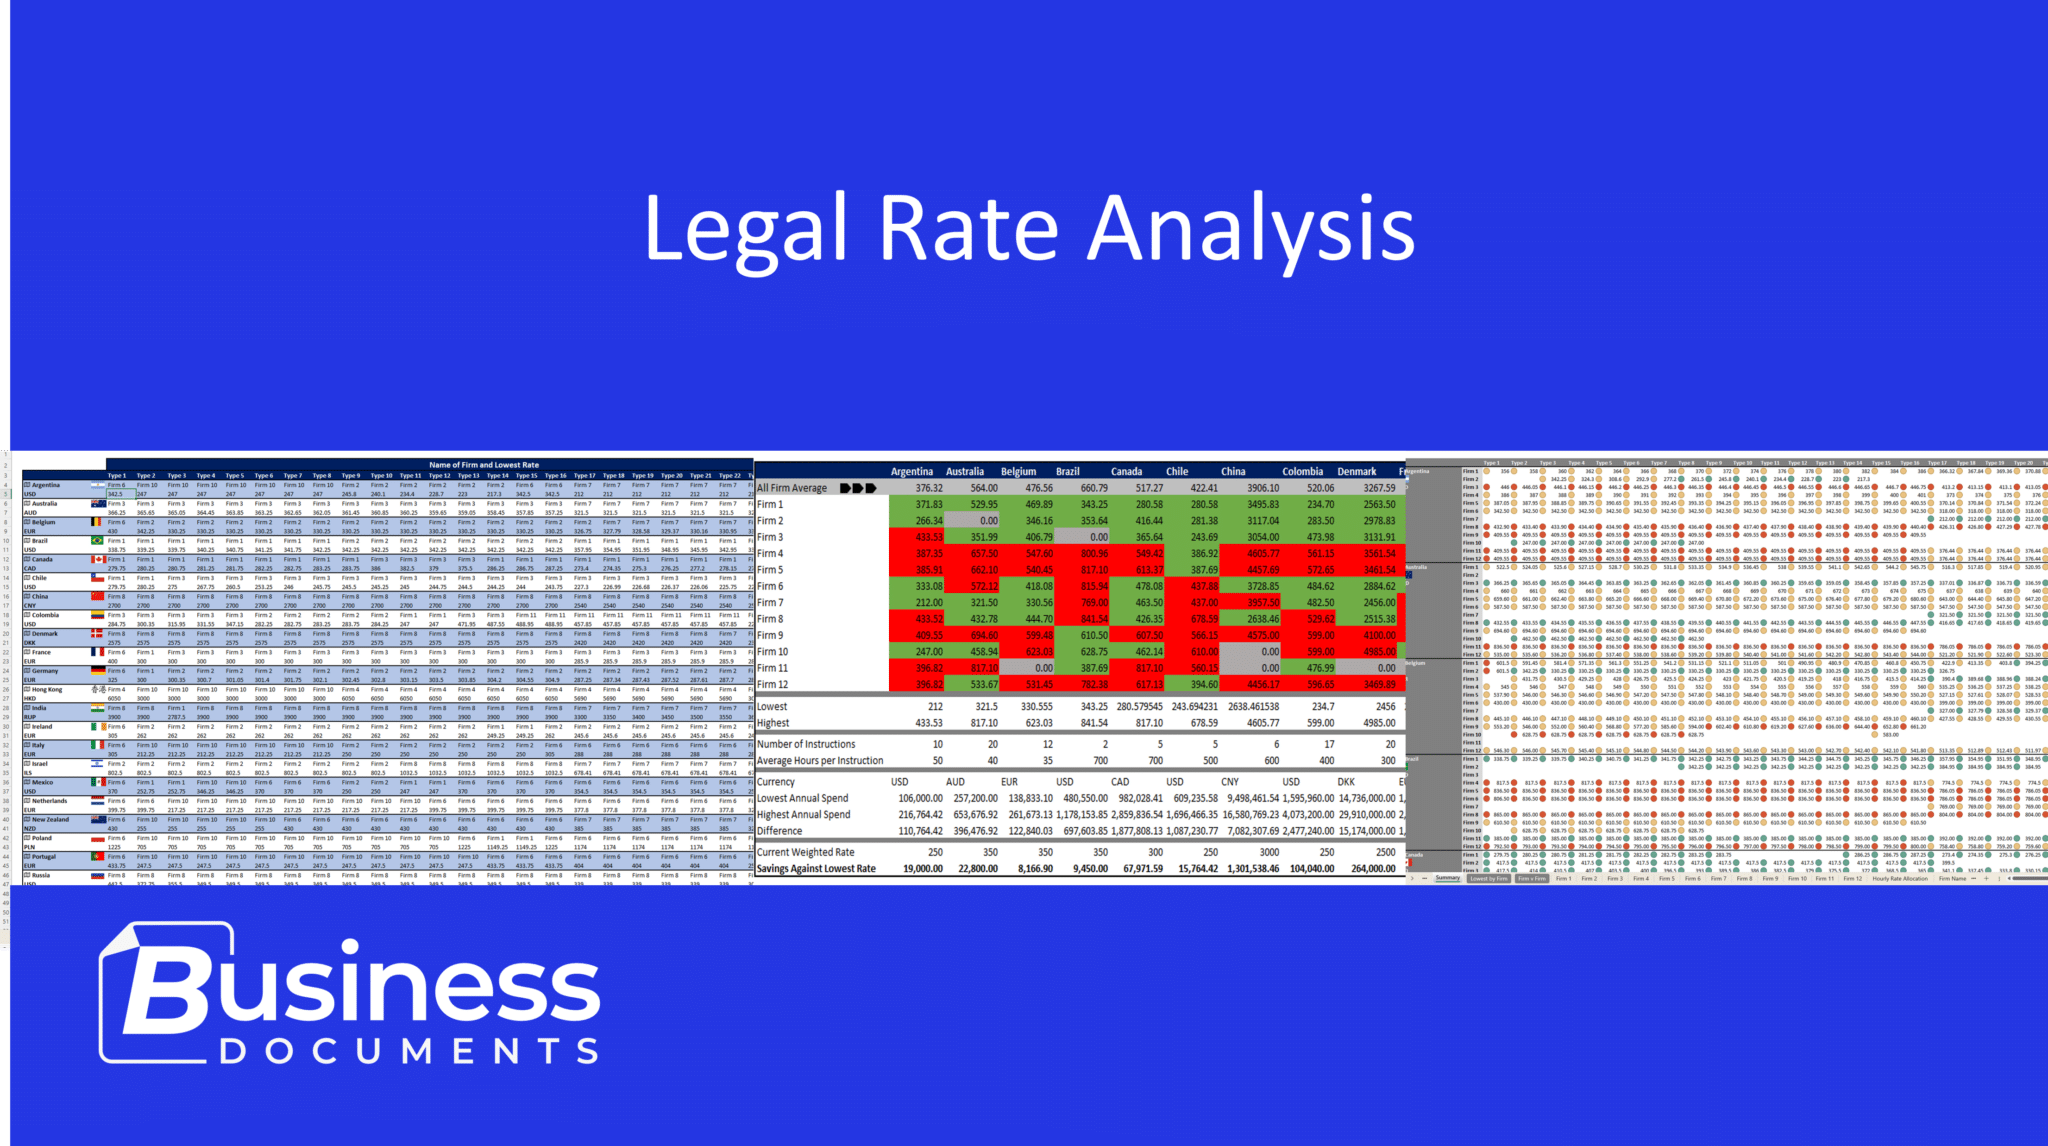 Legal Rate Analysis